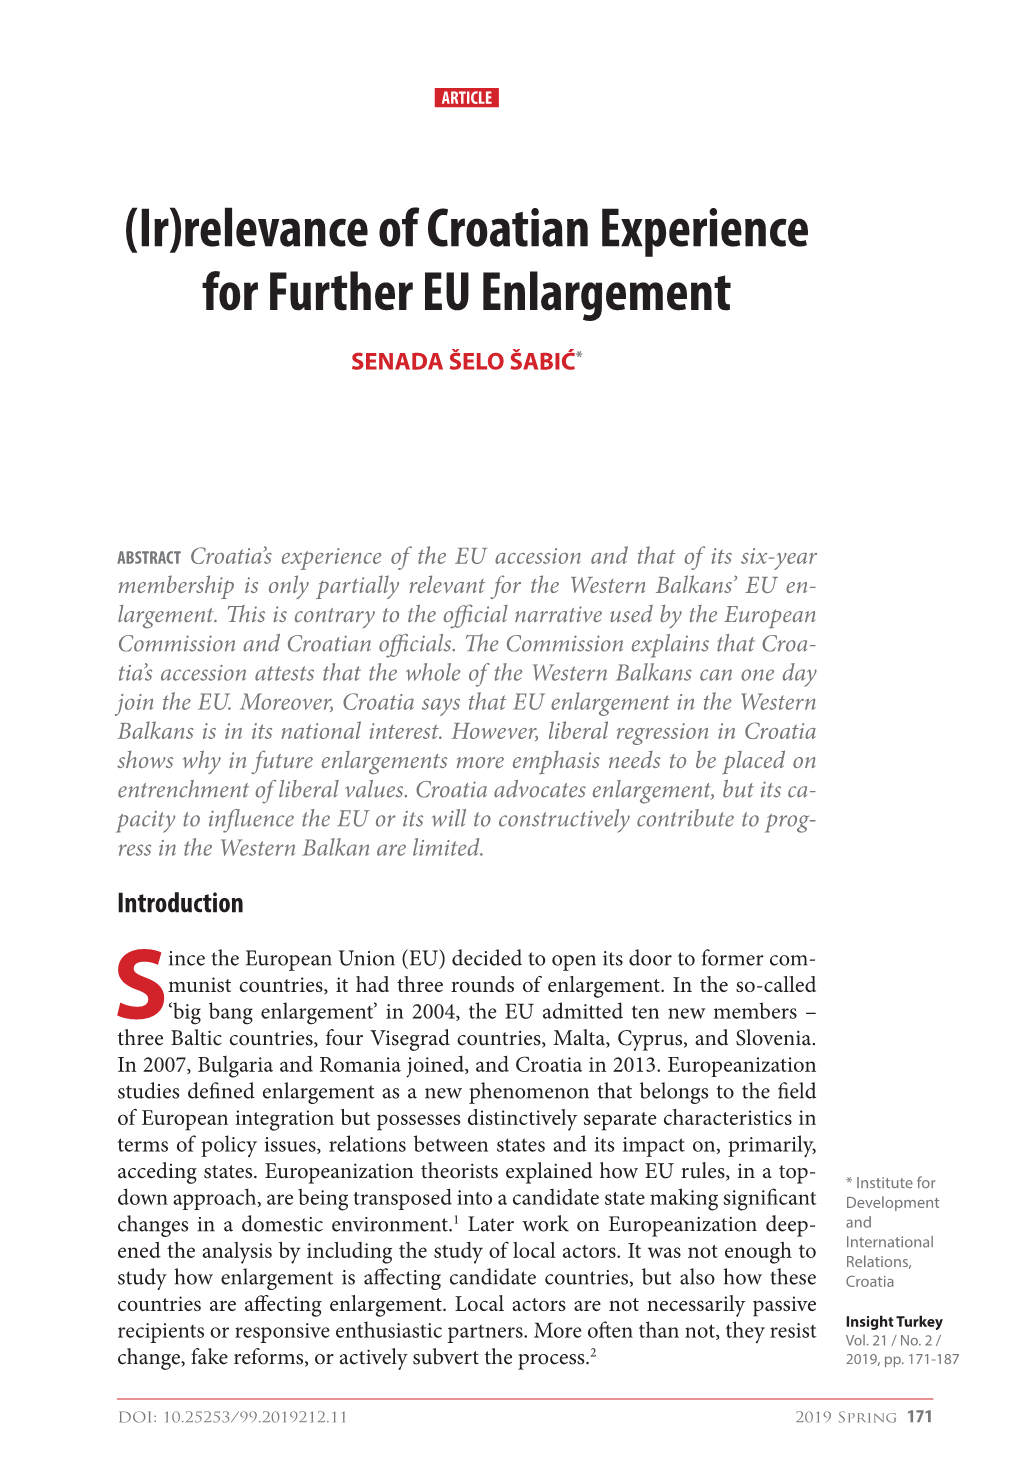 (Ir)Relevance of Croatian Experience for Further Eu Enlargement